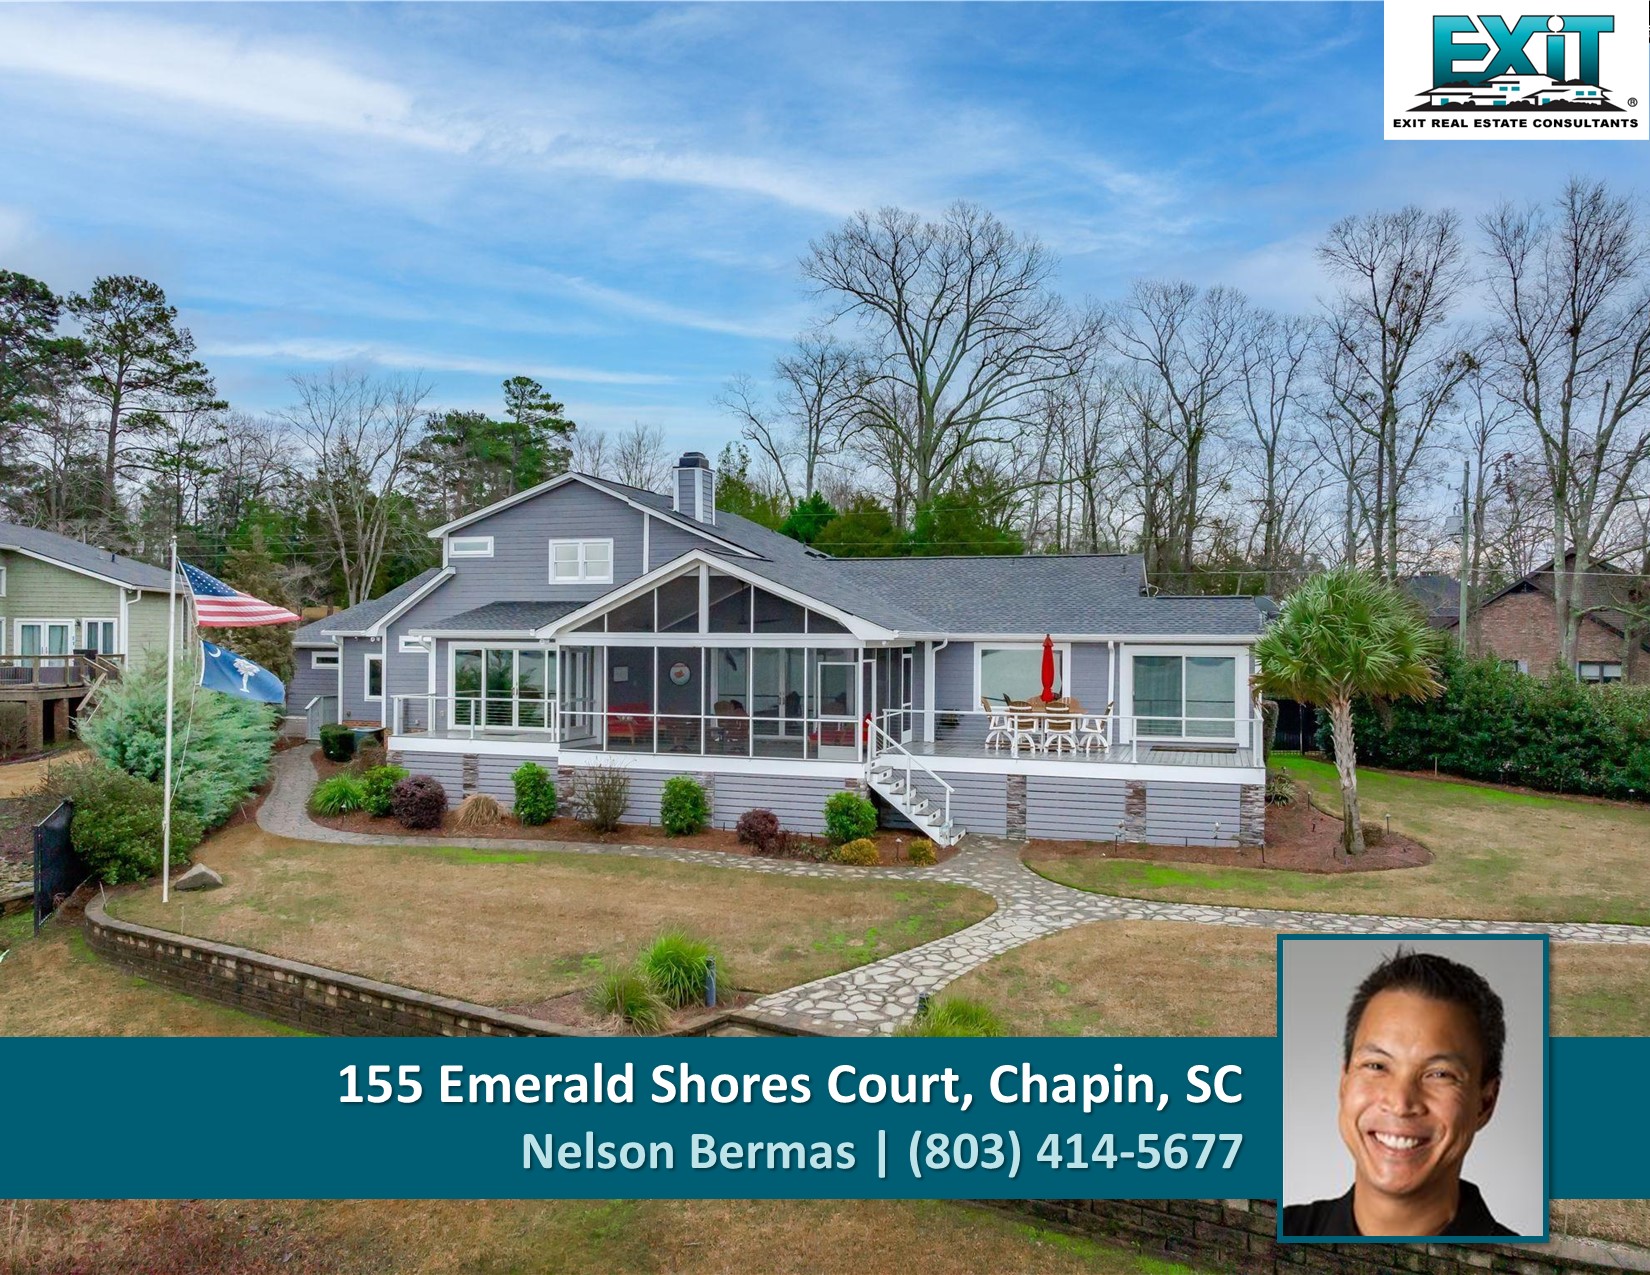 Just listed in Emerald Shores - Chapin